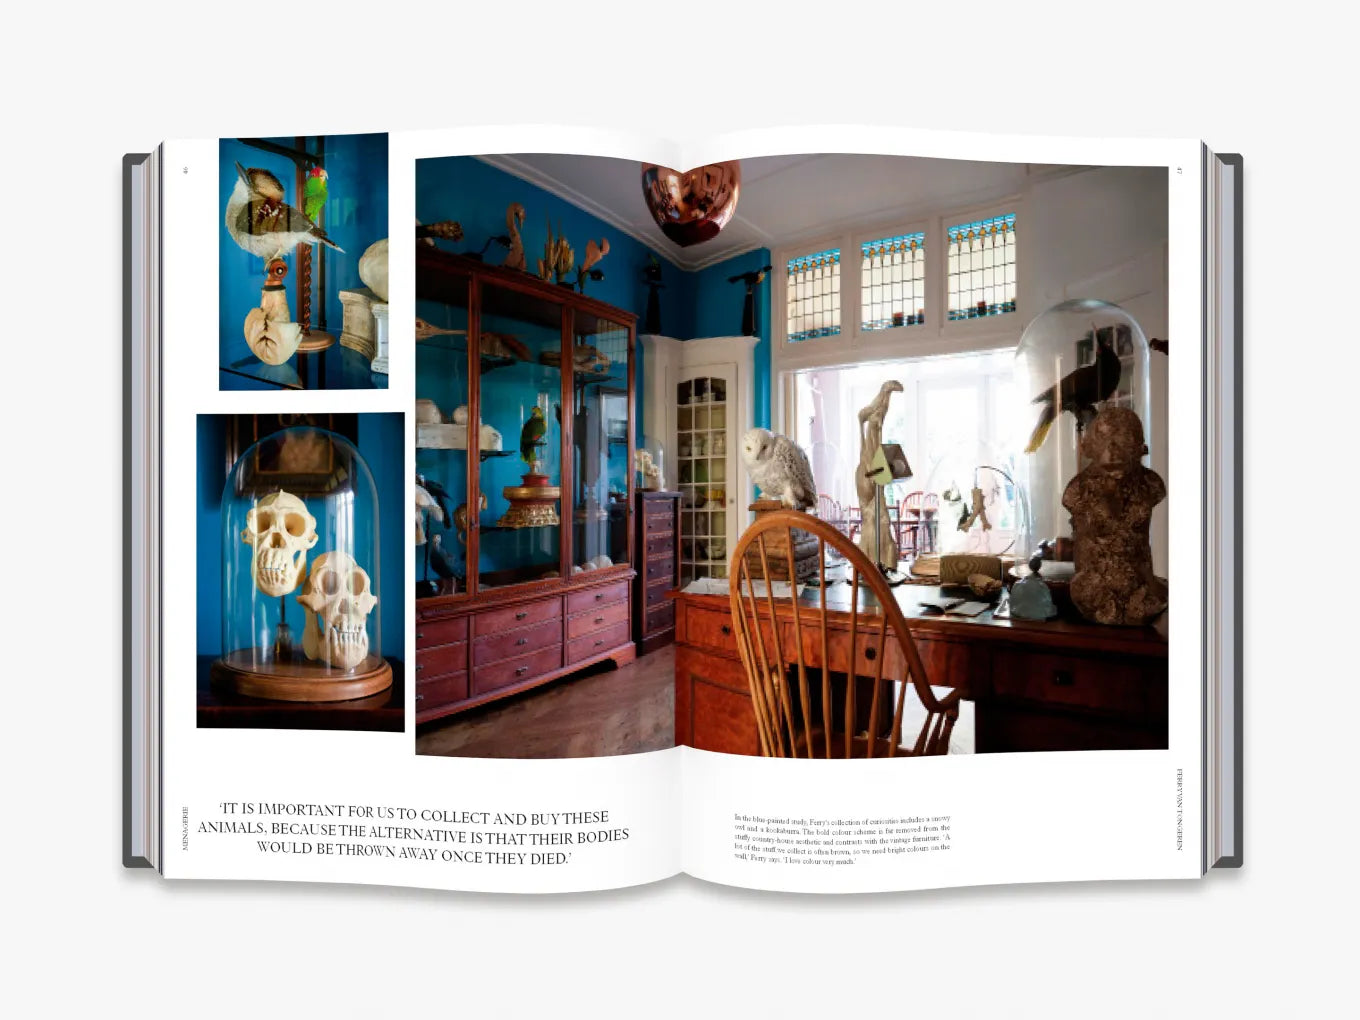 Thames & Hudson USA - Book - Cabinet of Wonders: The Gaston-Louis